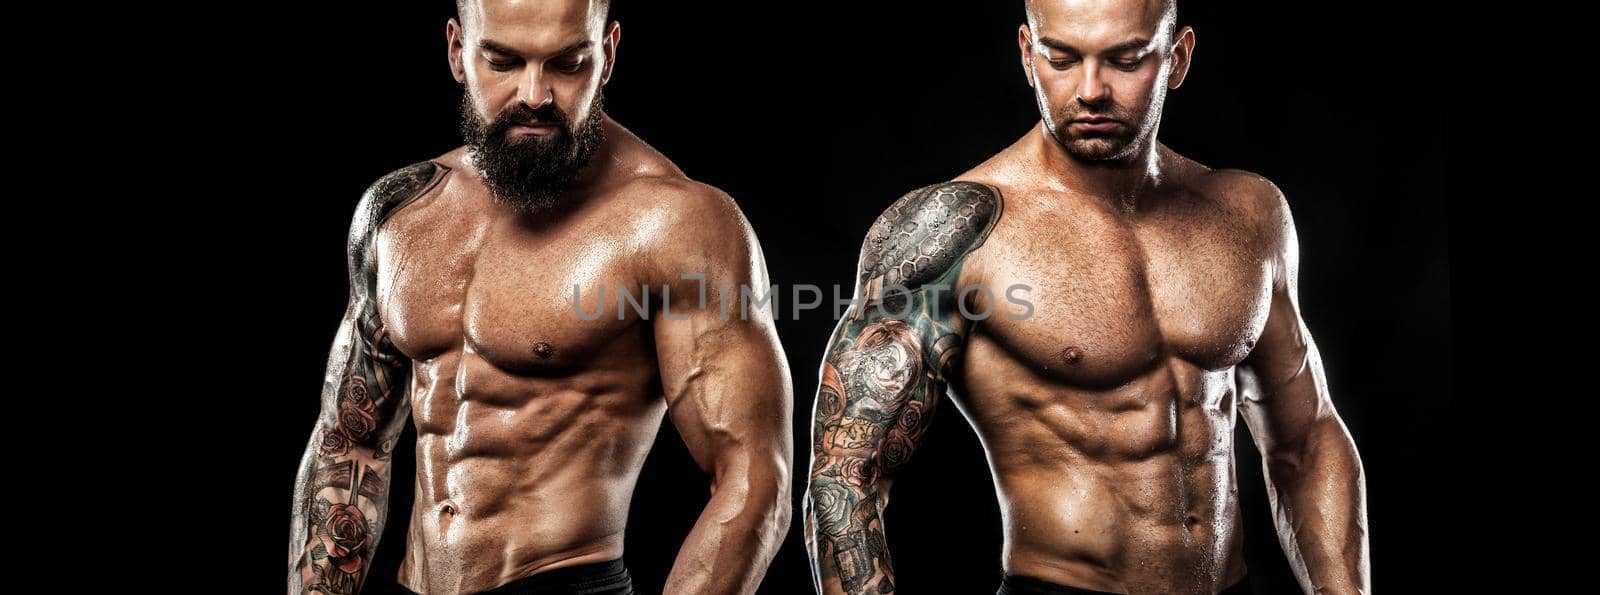 Tattoo man bodybuilder. Action shot with copy space.